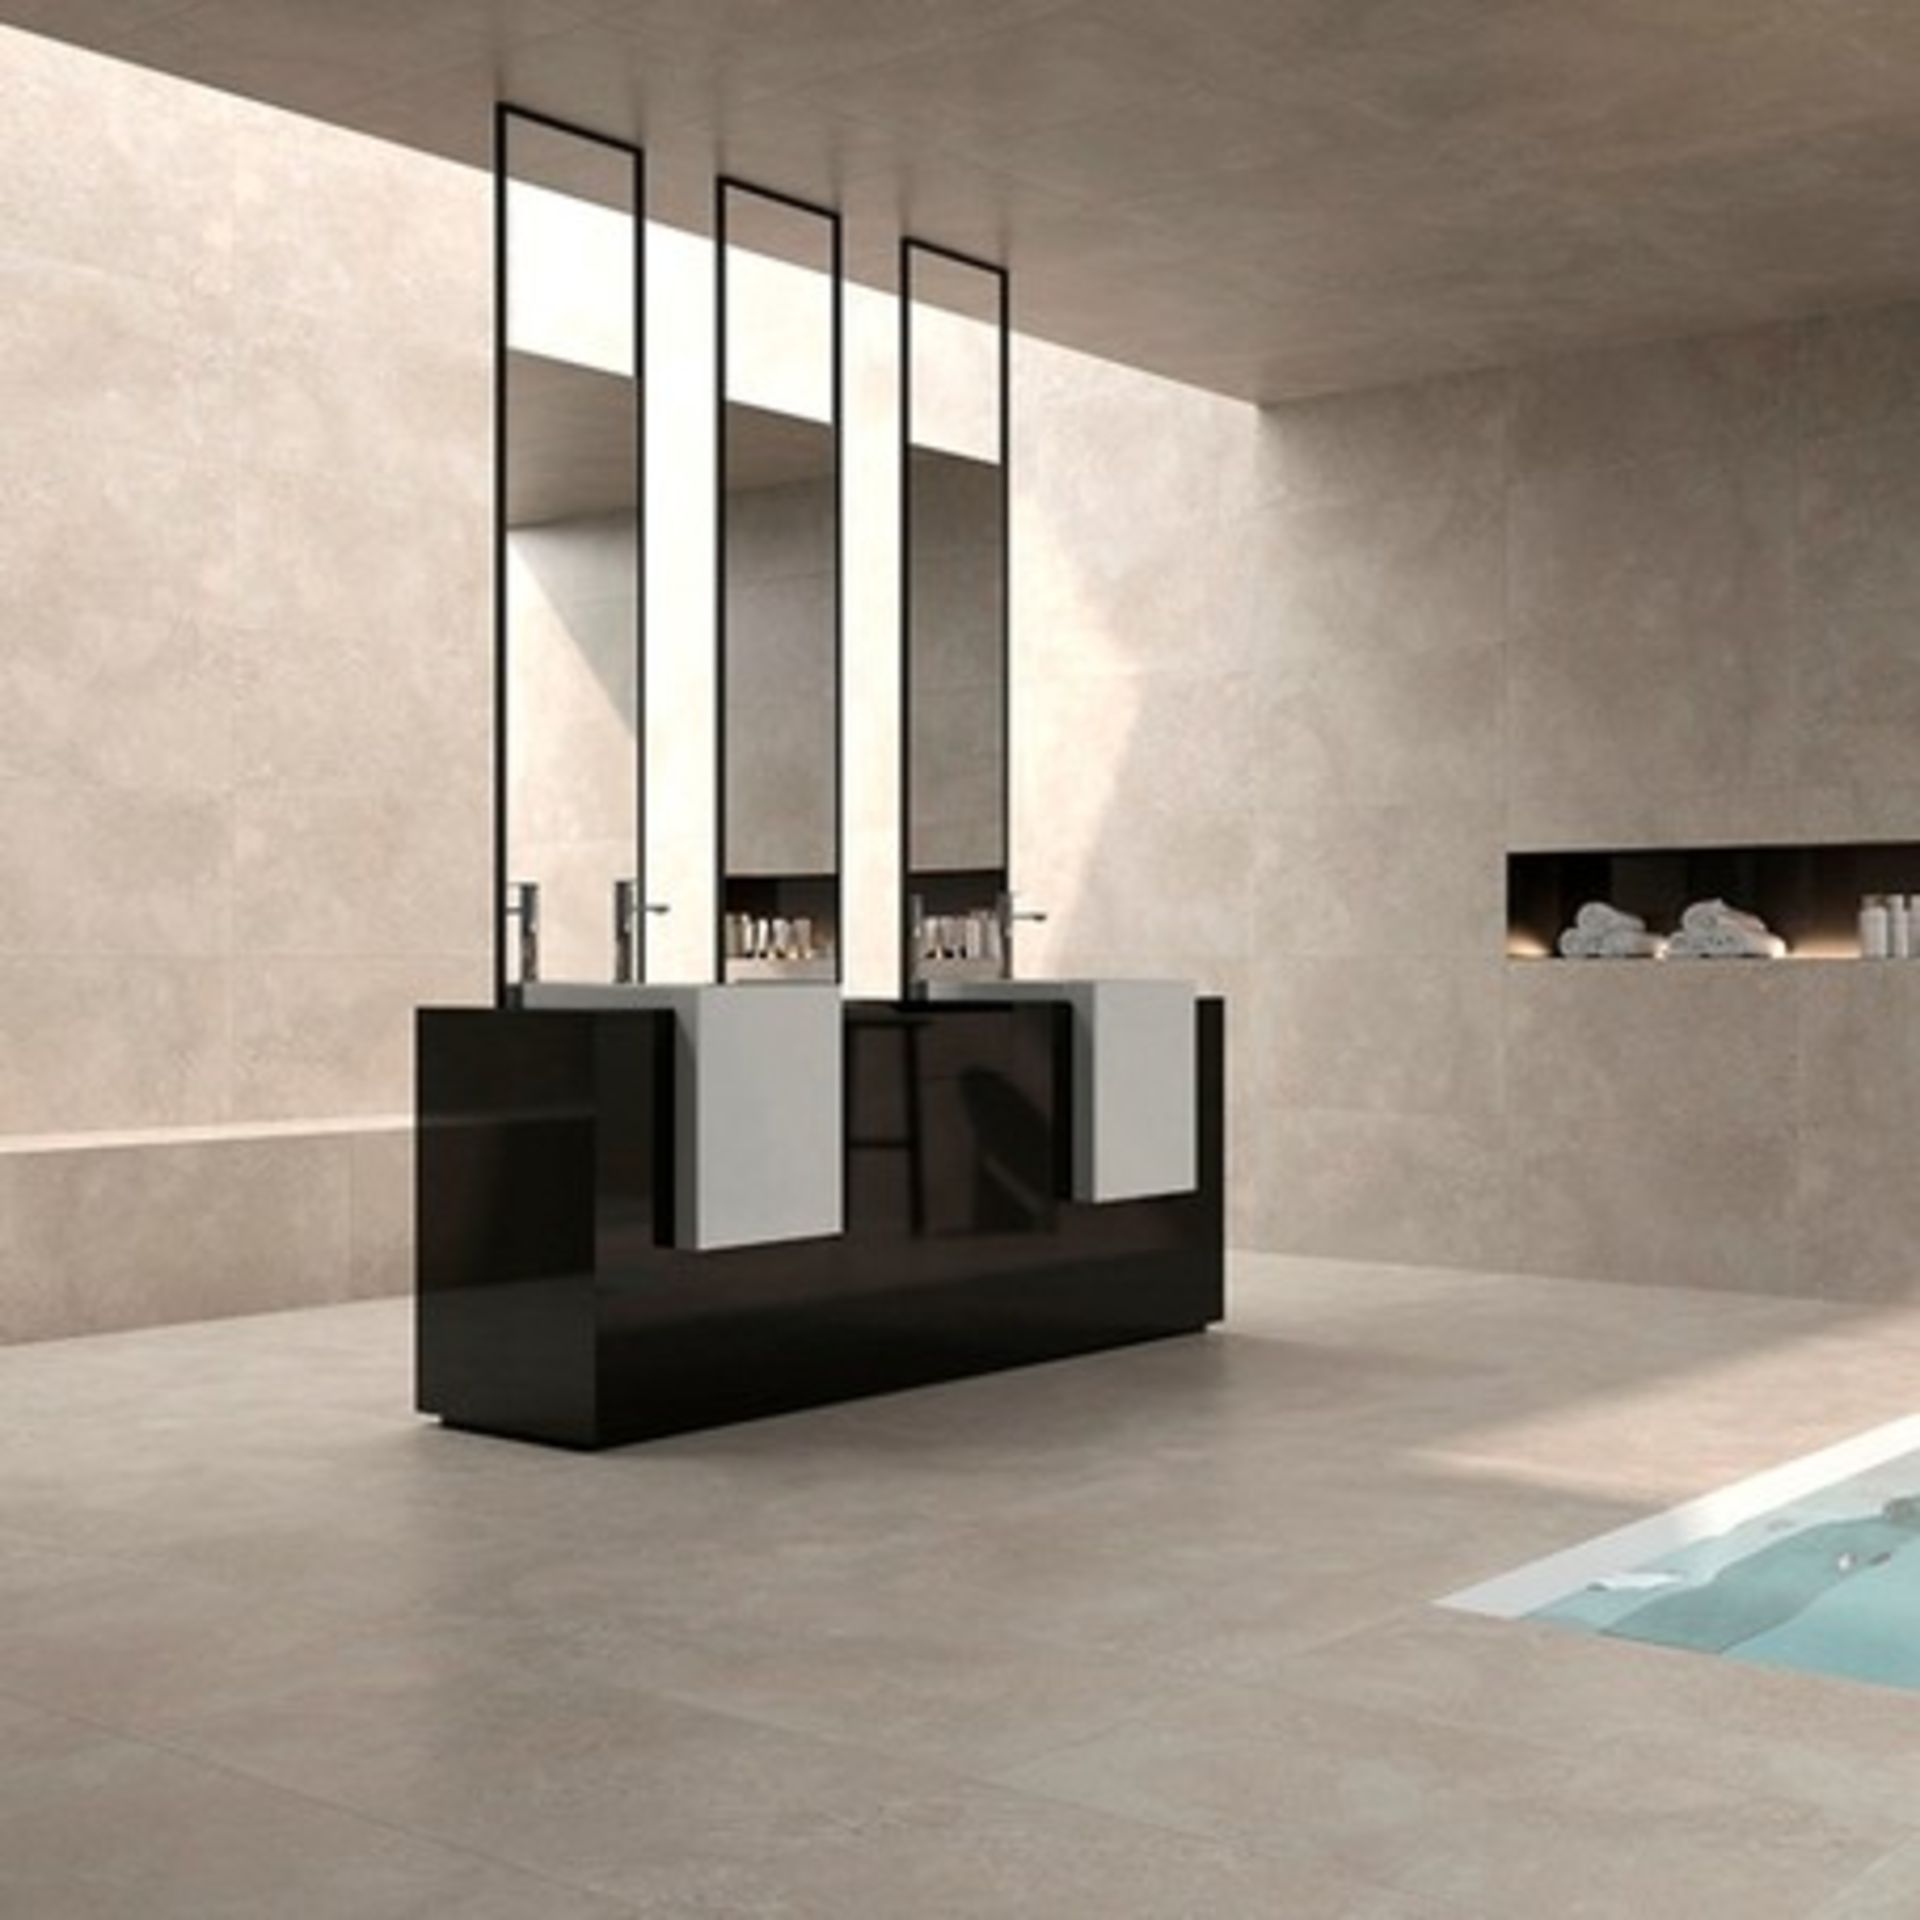 NEW 8.64m2 Veinstone Lapatto Brown Polished Wall and Floor Tiles. 300x600mm, 1.08m2 per pack. ...